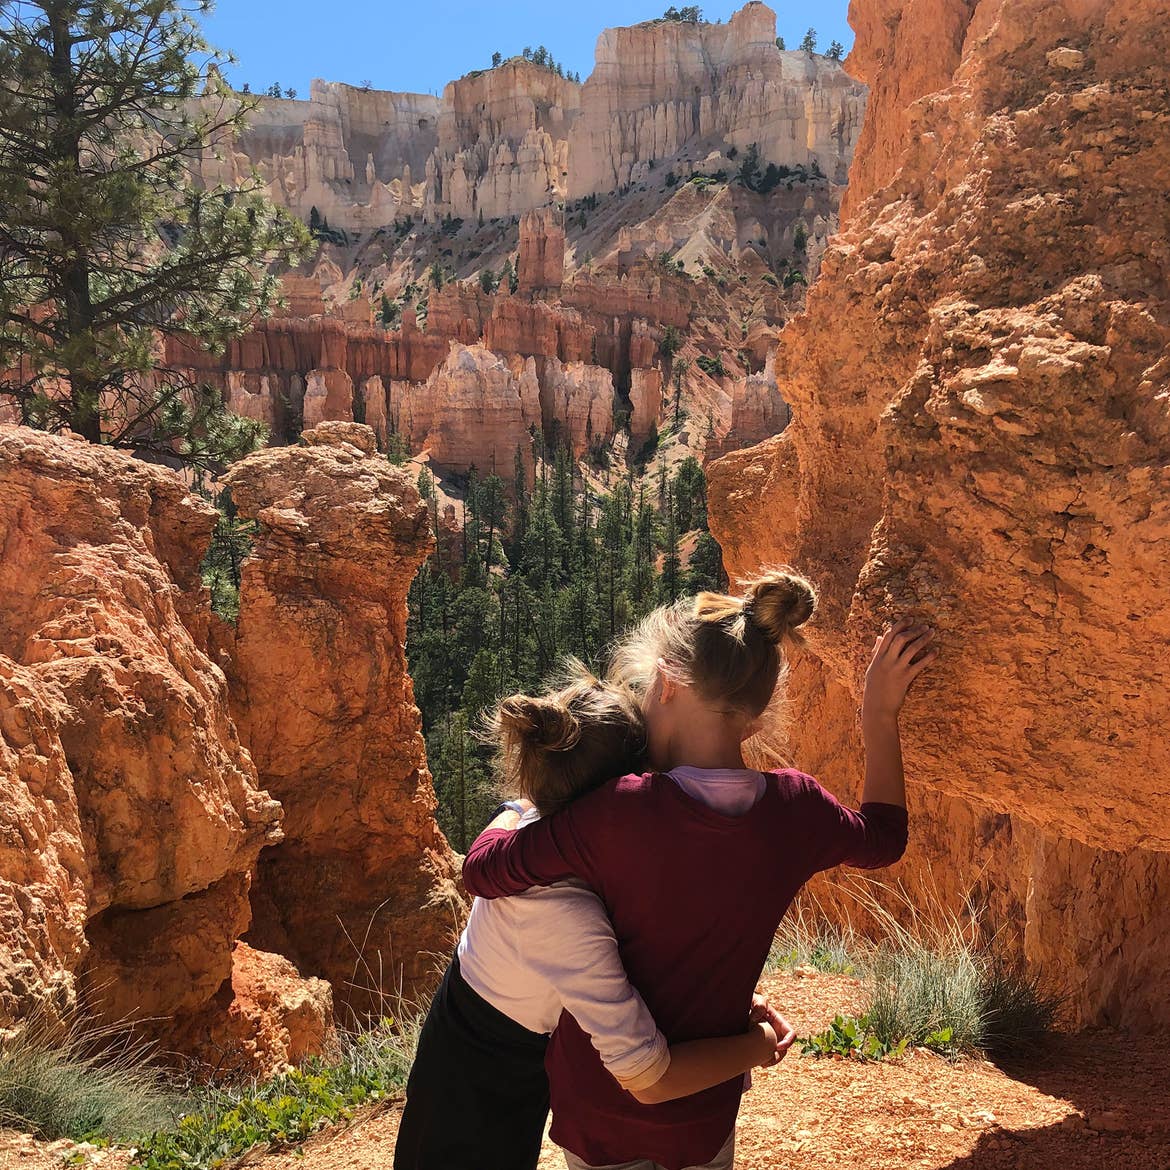 Kyler (left) and Kyndall (right) pose in front of Red Rock formations from Capitol Reef National Park.